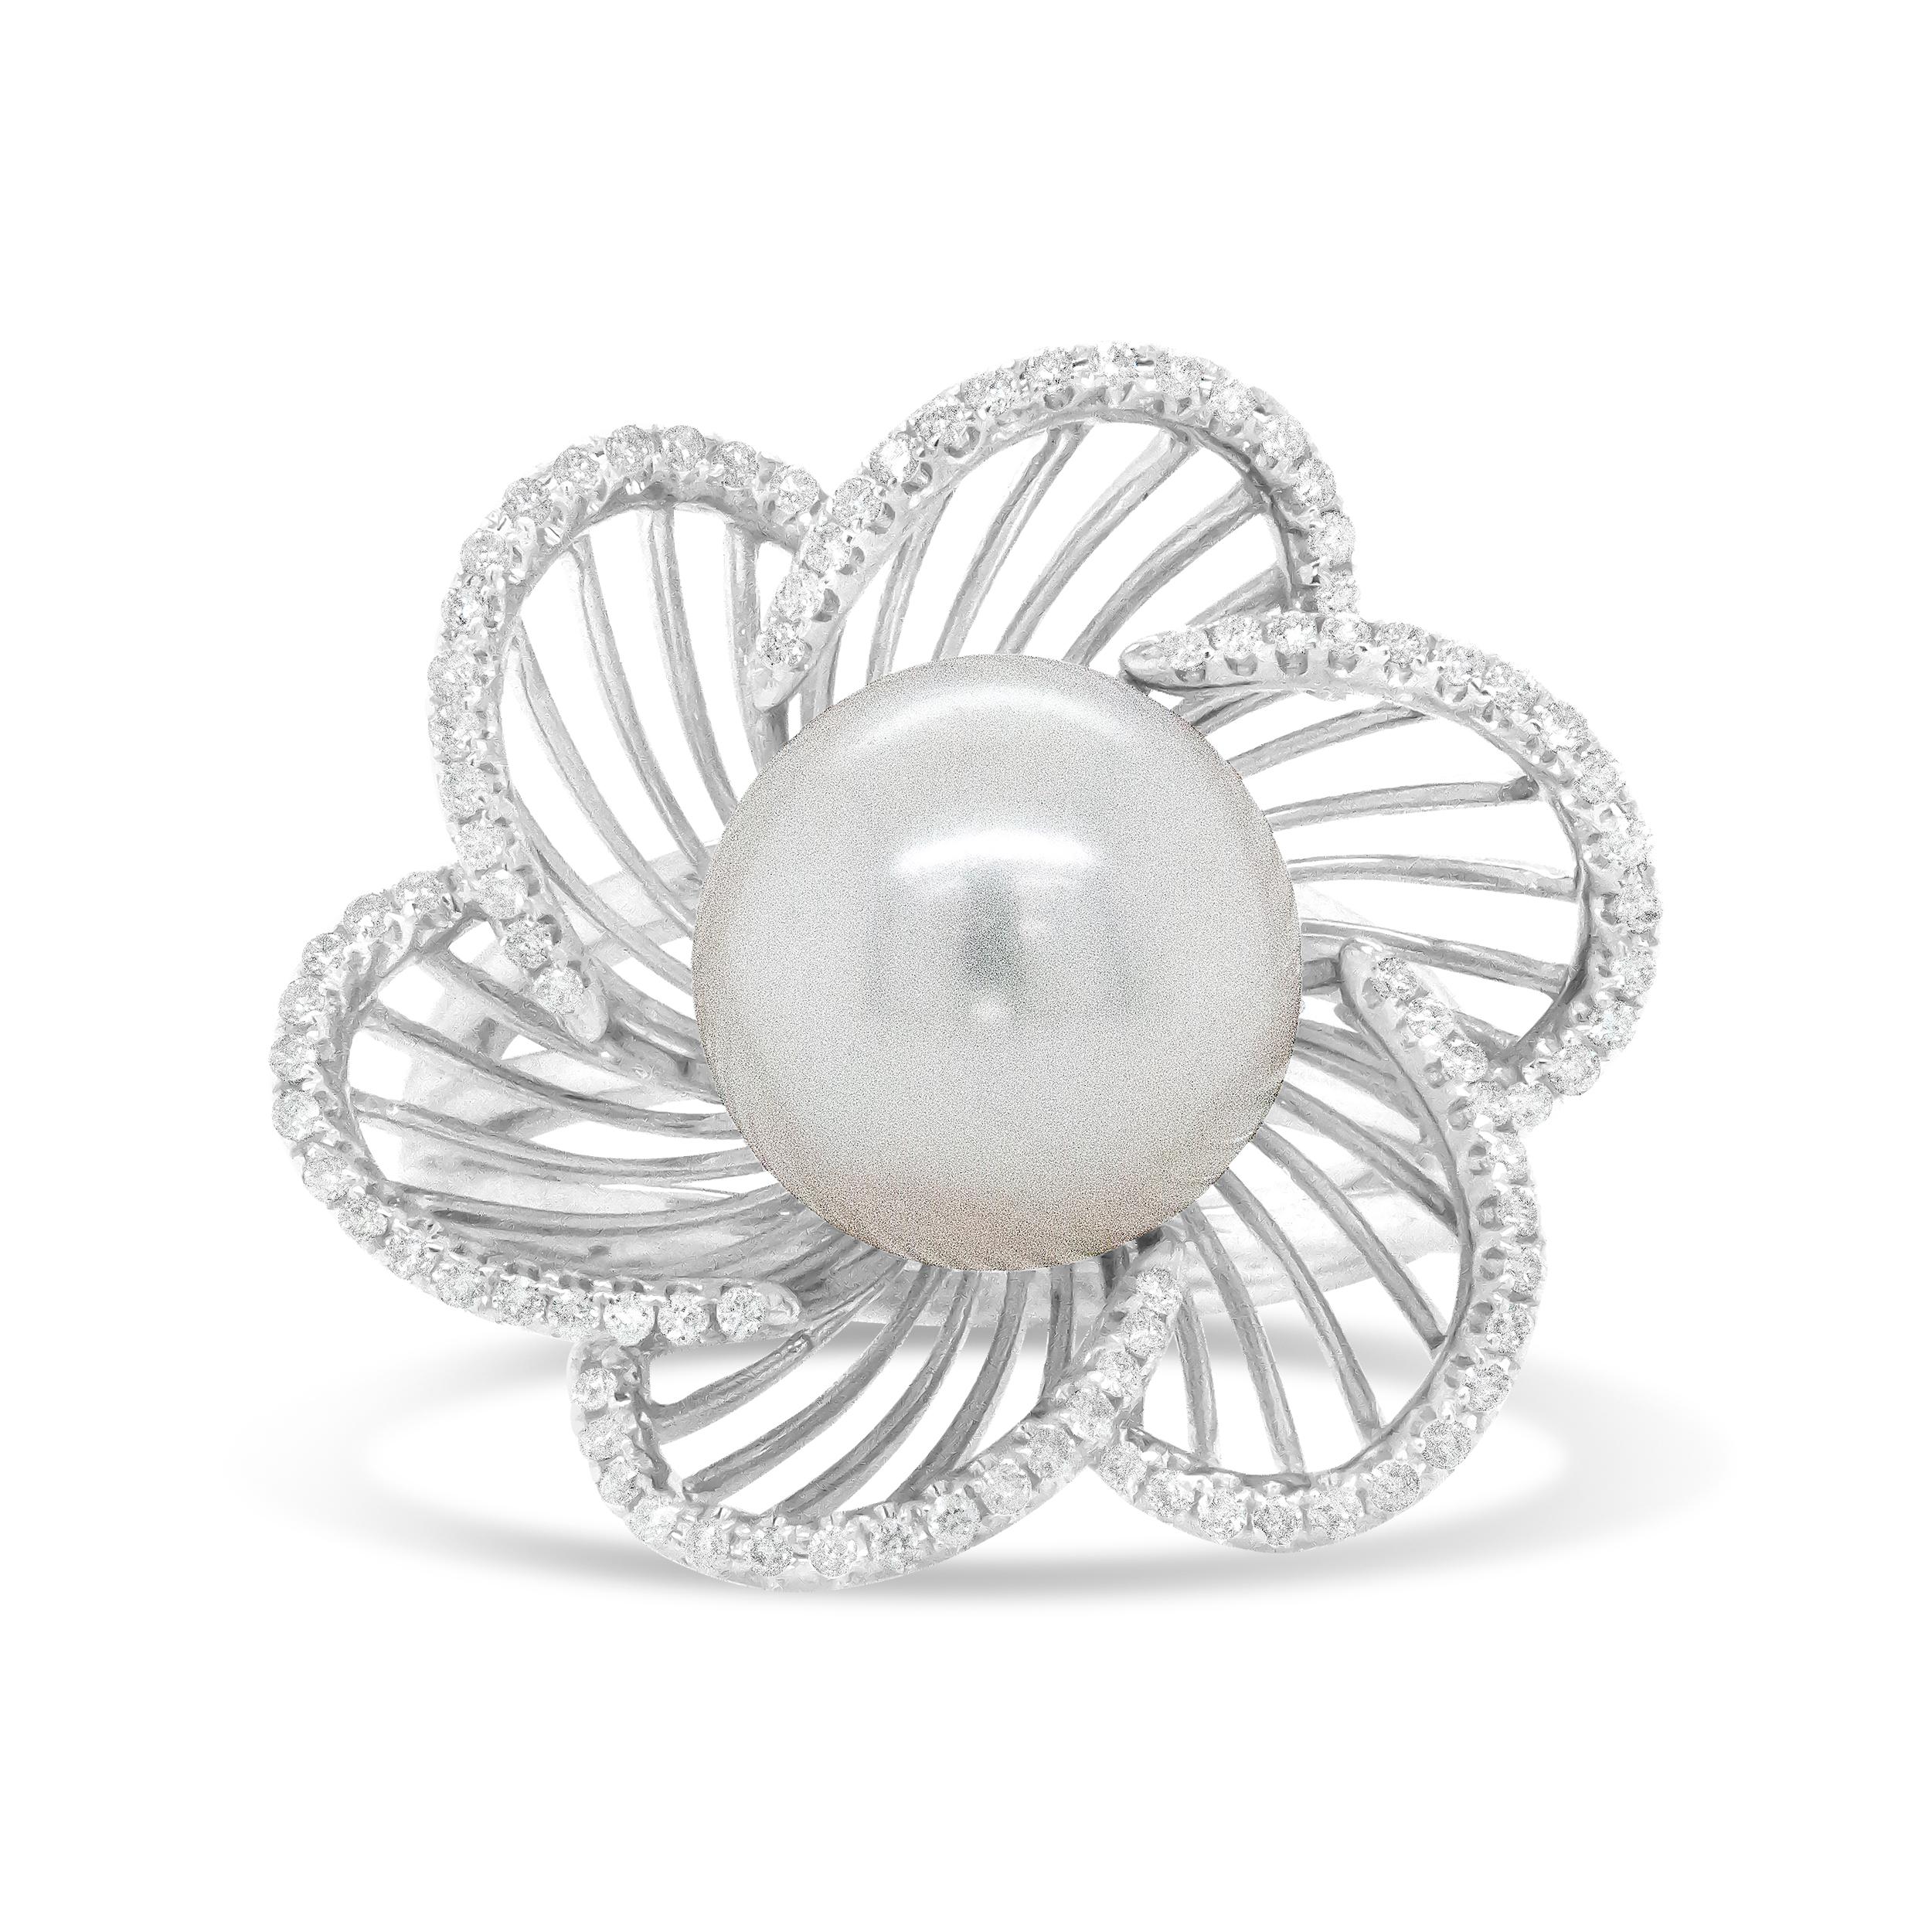 The timeless style of this stunning 14k white gold ring will always be in season. In a floral motif, this ring features an elegant 11mm round pearl at its center. The precious metal stretches out in an openwork design that mimics the petals of a